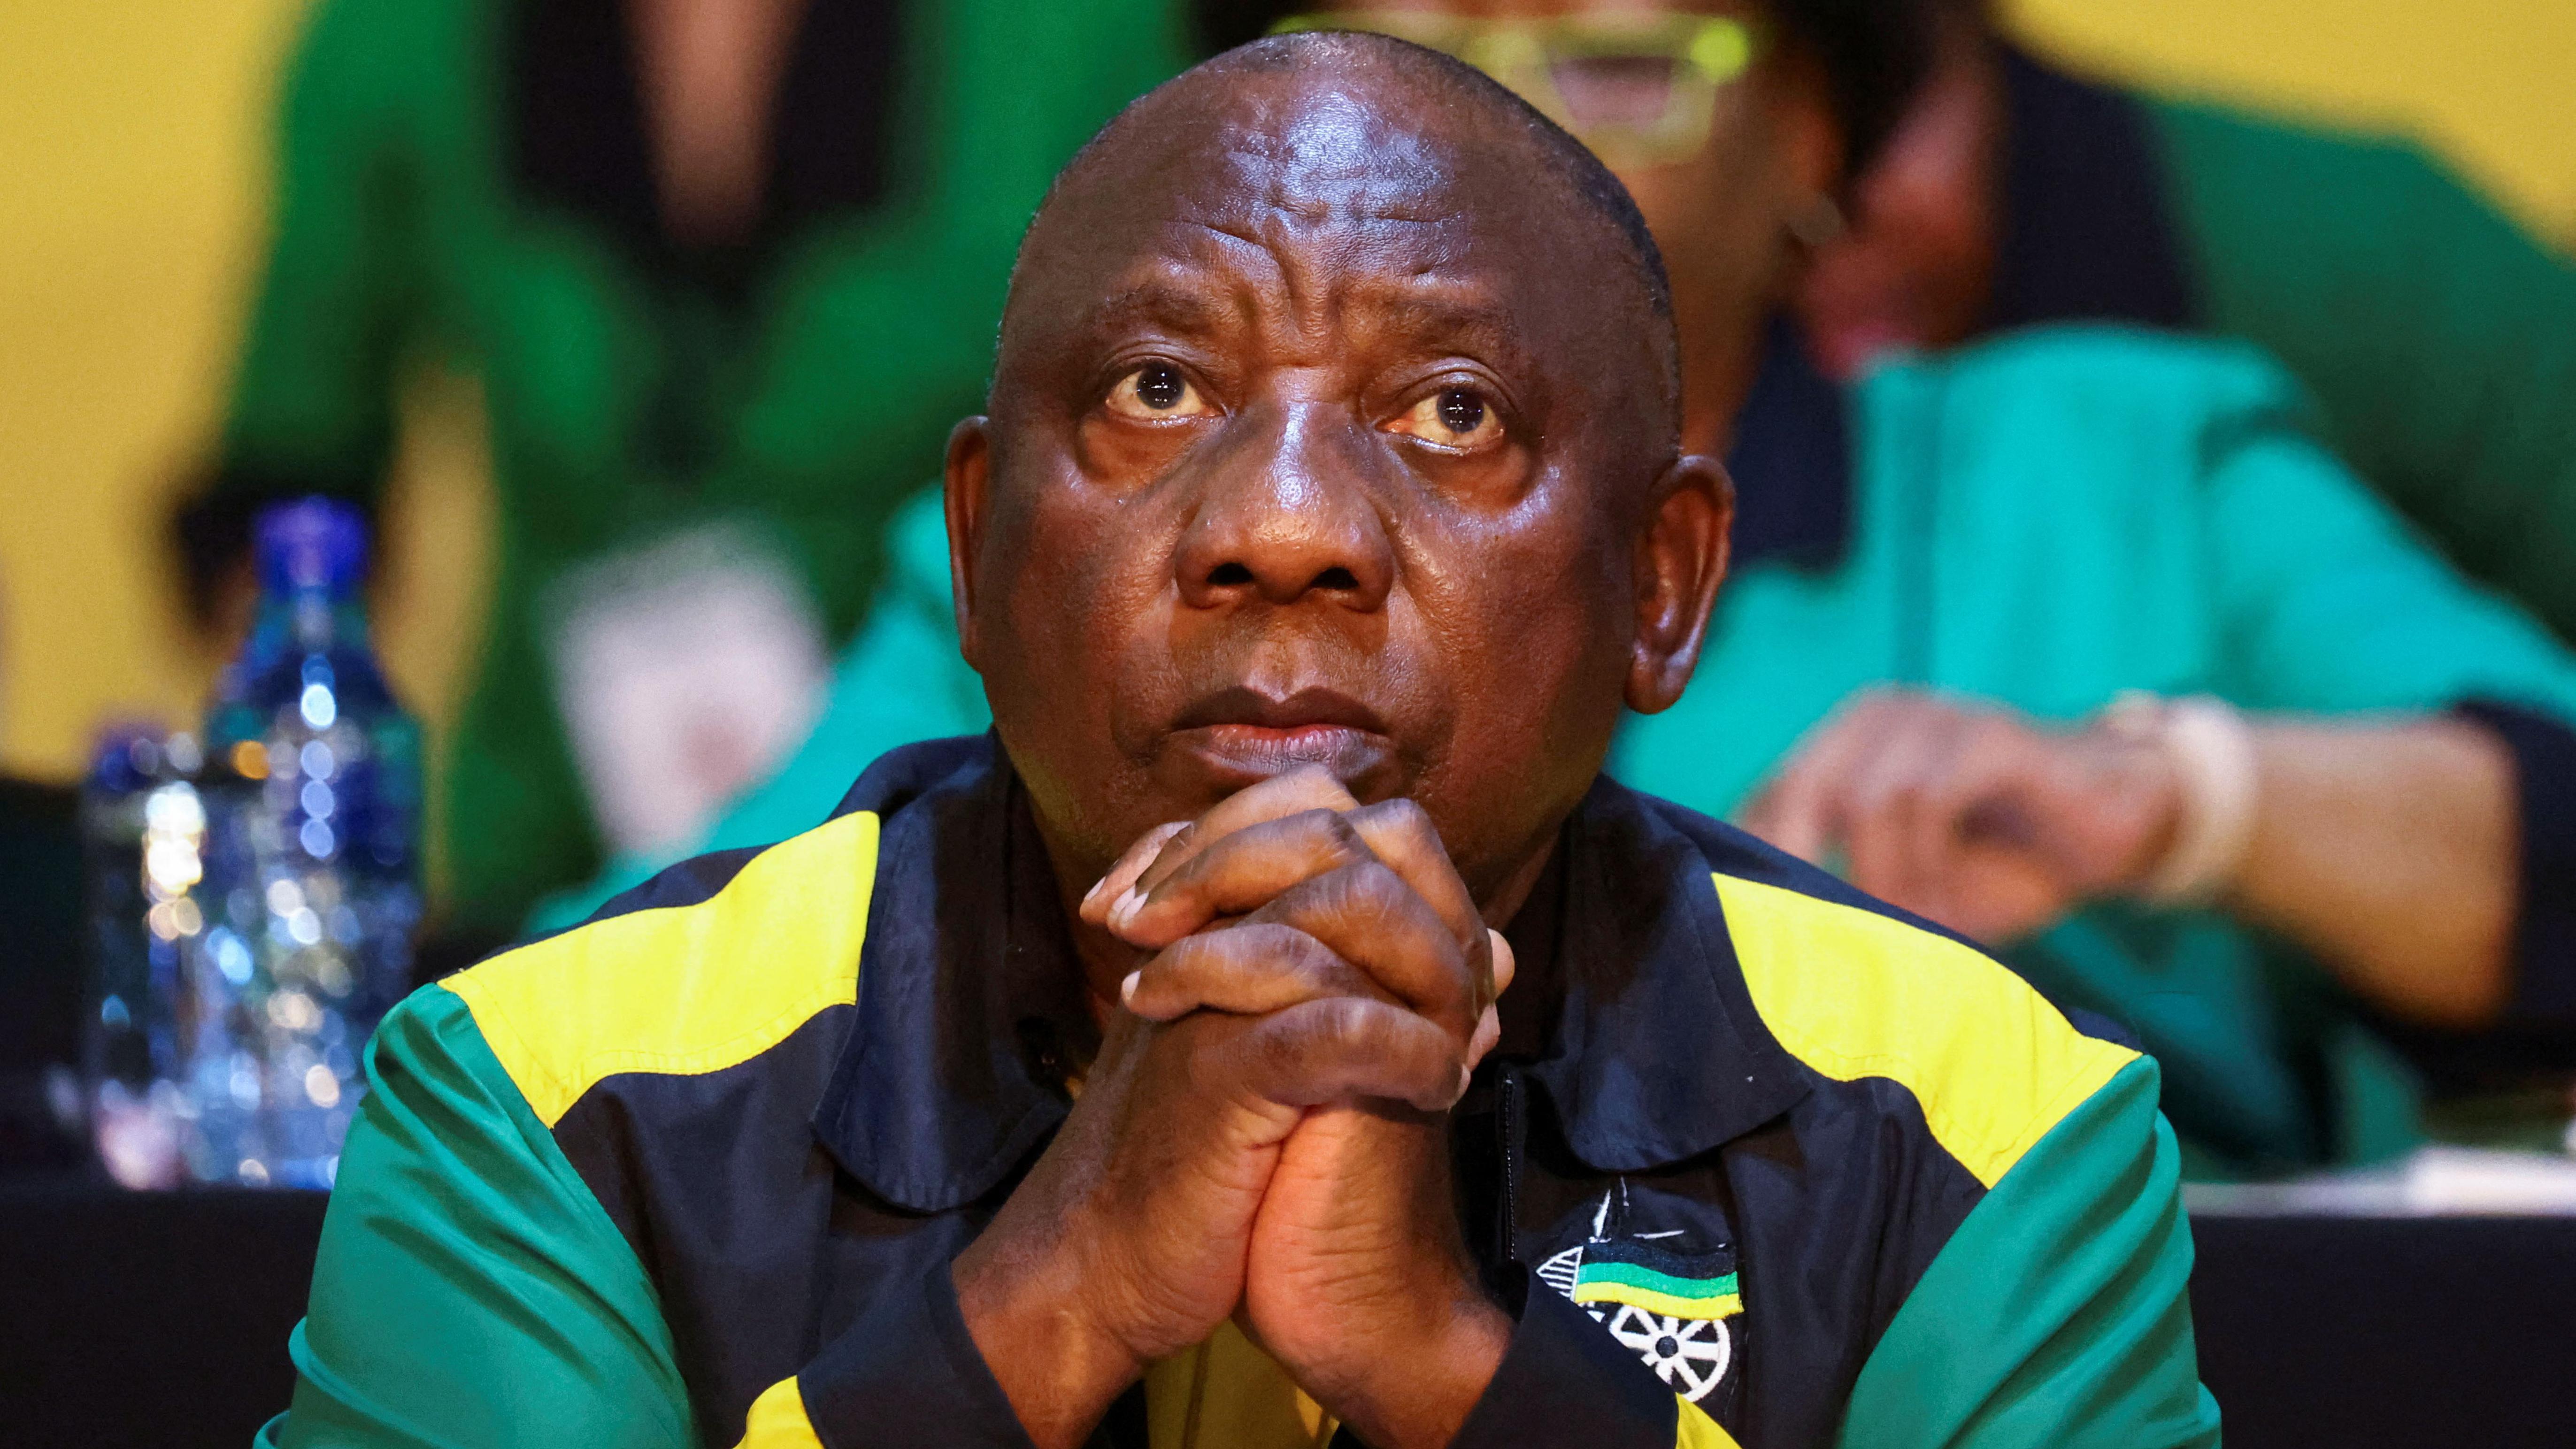 ANC looks set to share power after historic election loss